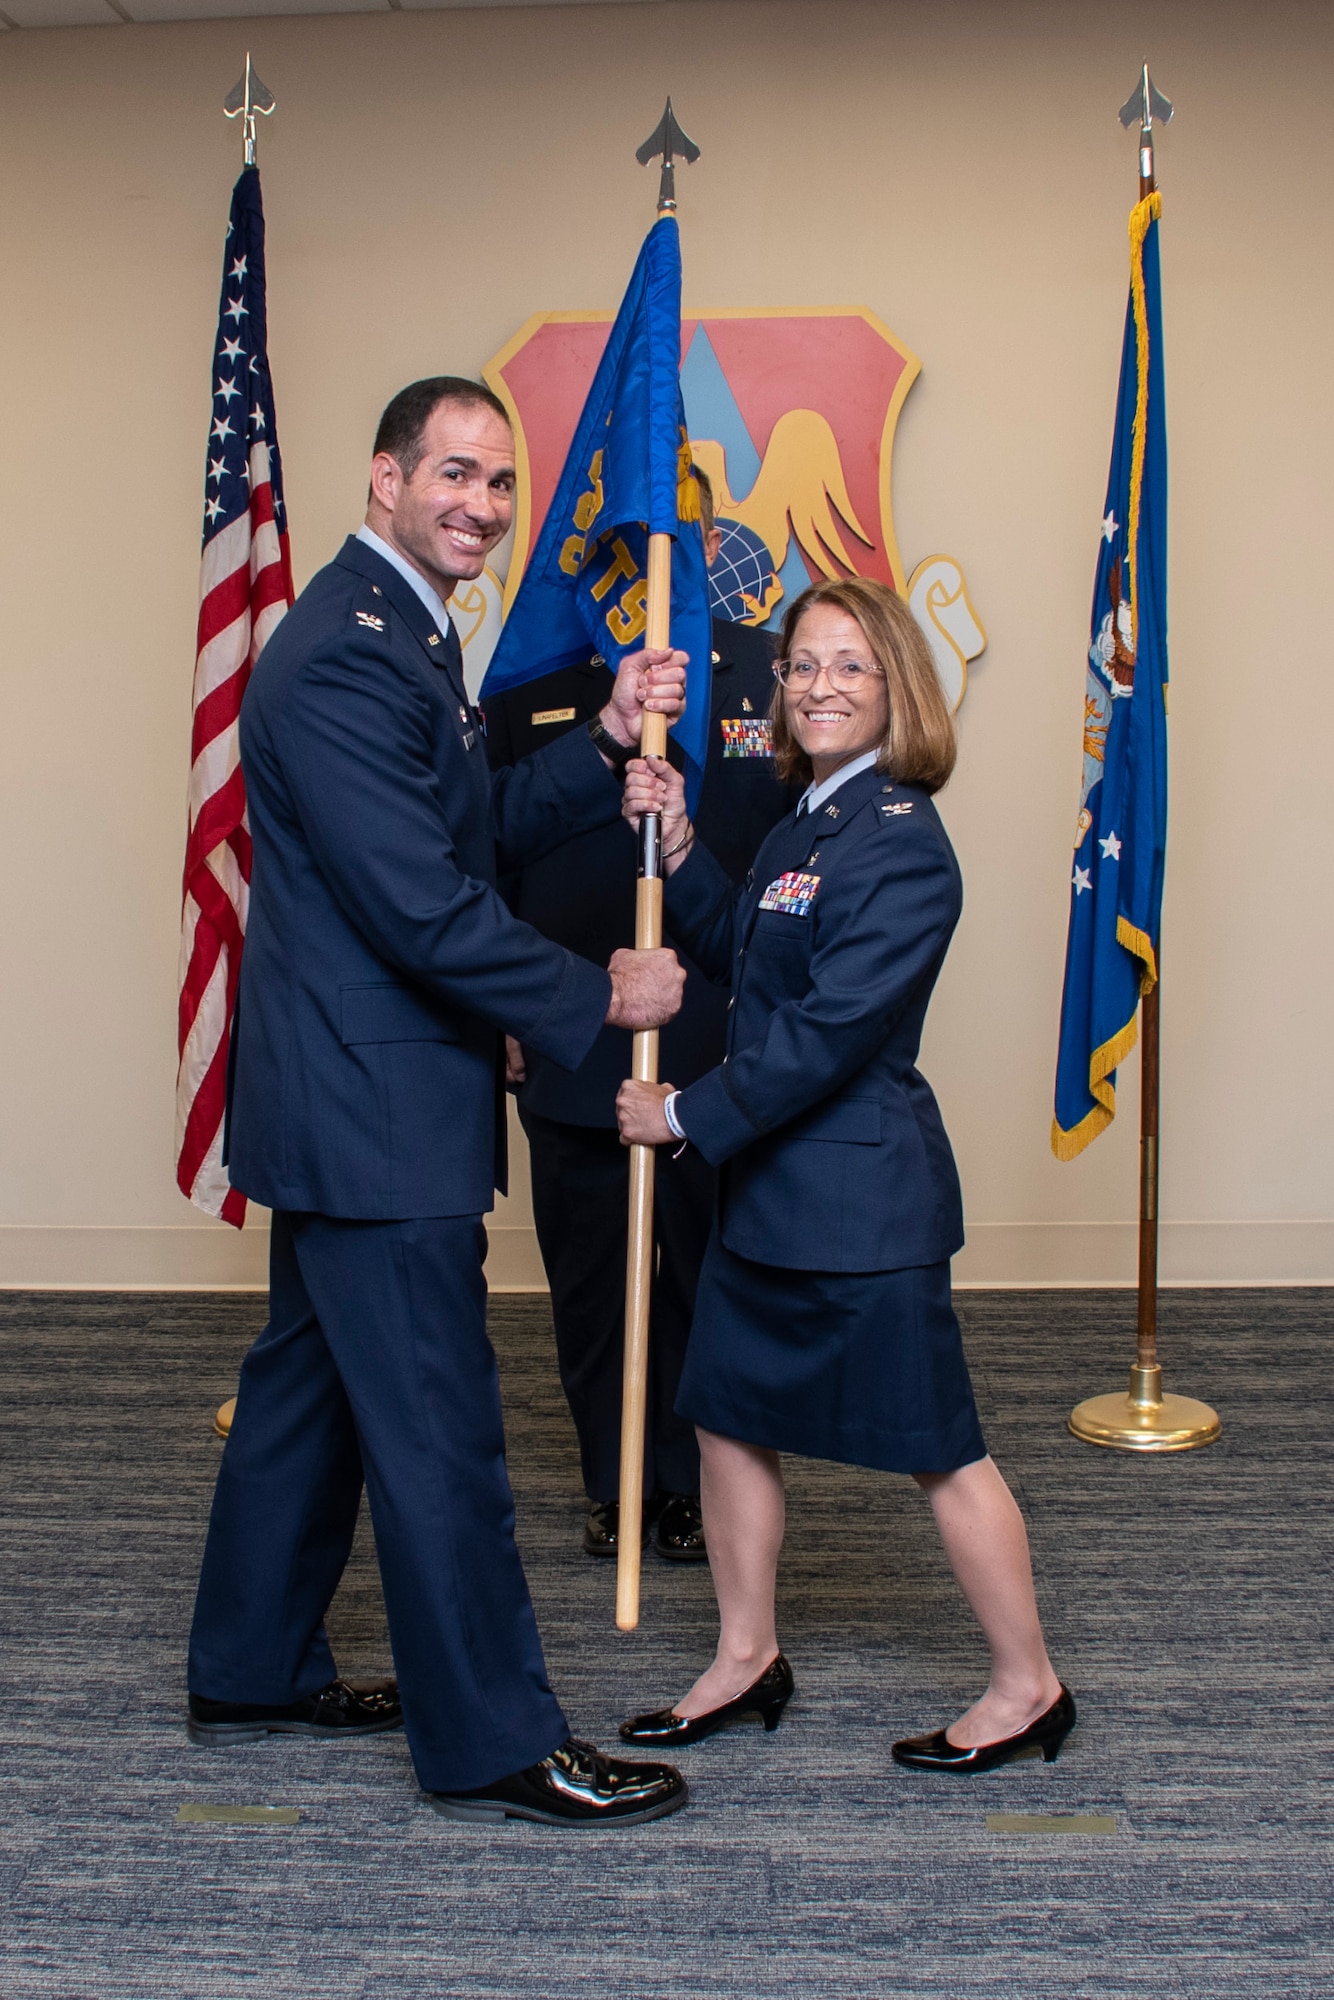 Col. Christopher Spinelli, 932nd Medical Group commander, passes the guidon to Col. Jennifer Brothers, incoming 932nd Aeromedical Staging Squadron during the ASTS assumption of command, Aug 7, 2022, Scott Air Force Base, Ill. (U.S. Air Force photo by SSgt Brooke Spenner)